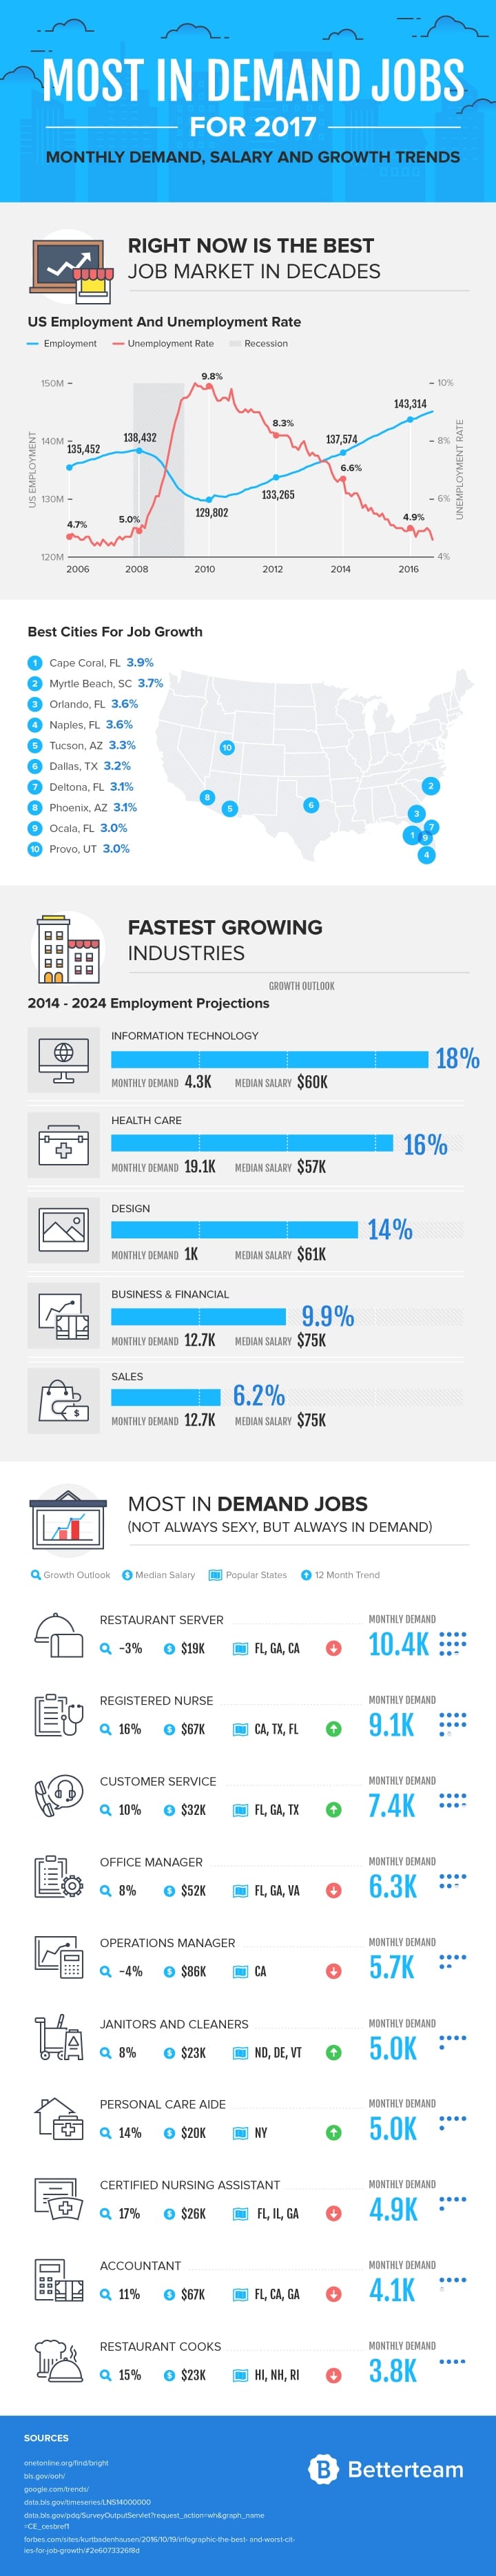 Most In-Demand Jobs 2017 Infographic